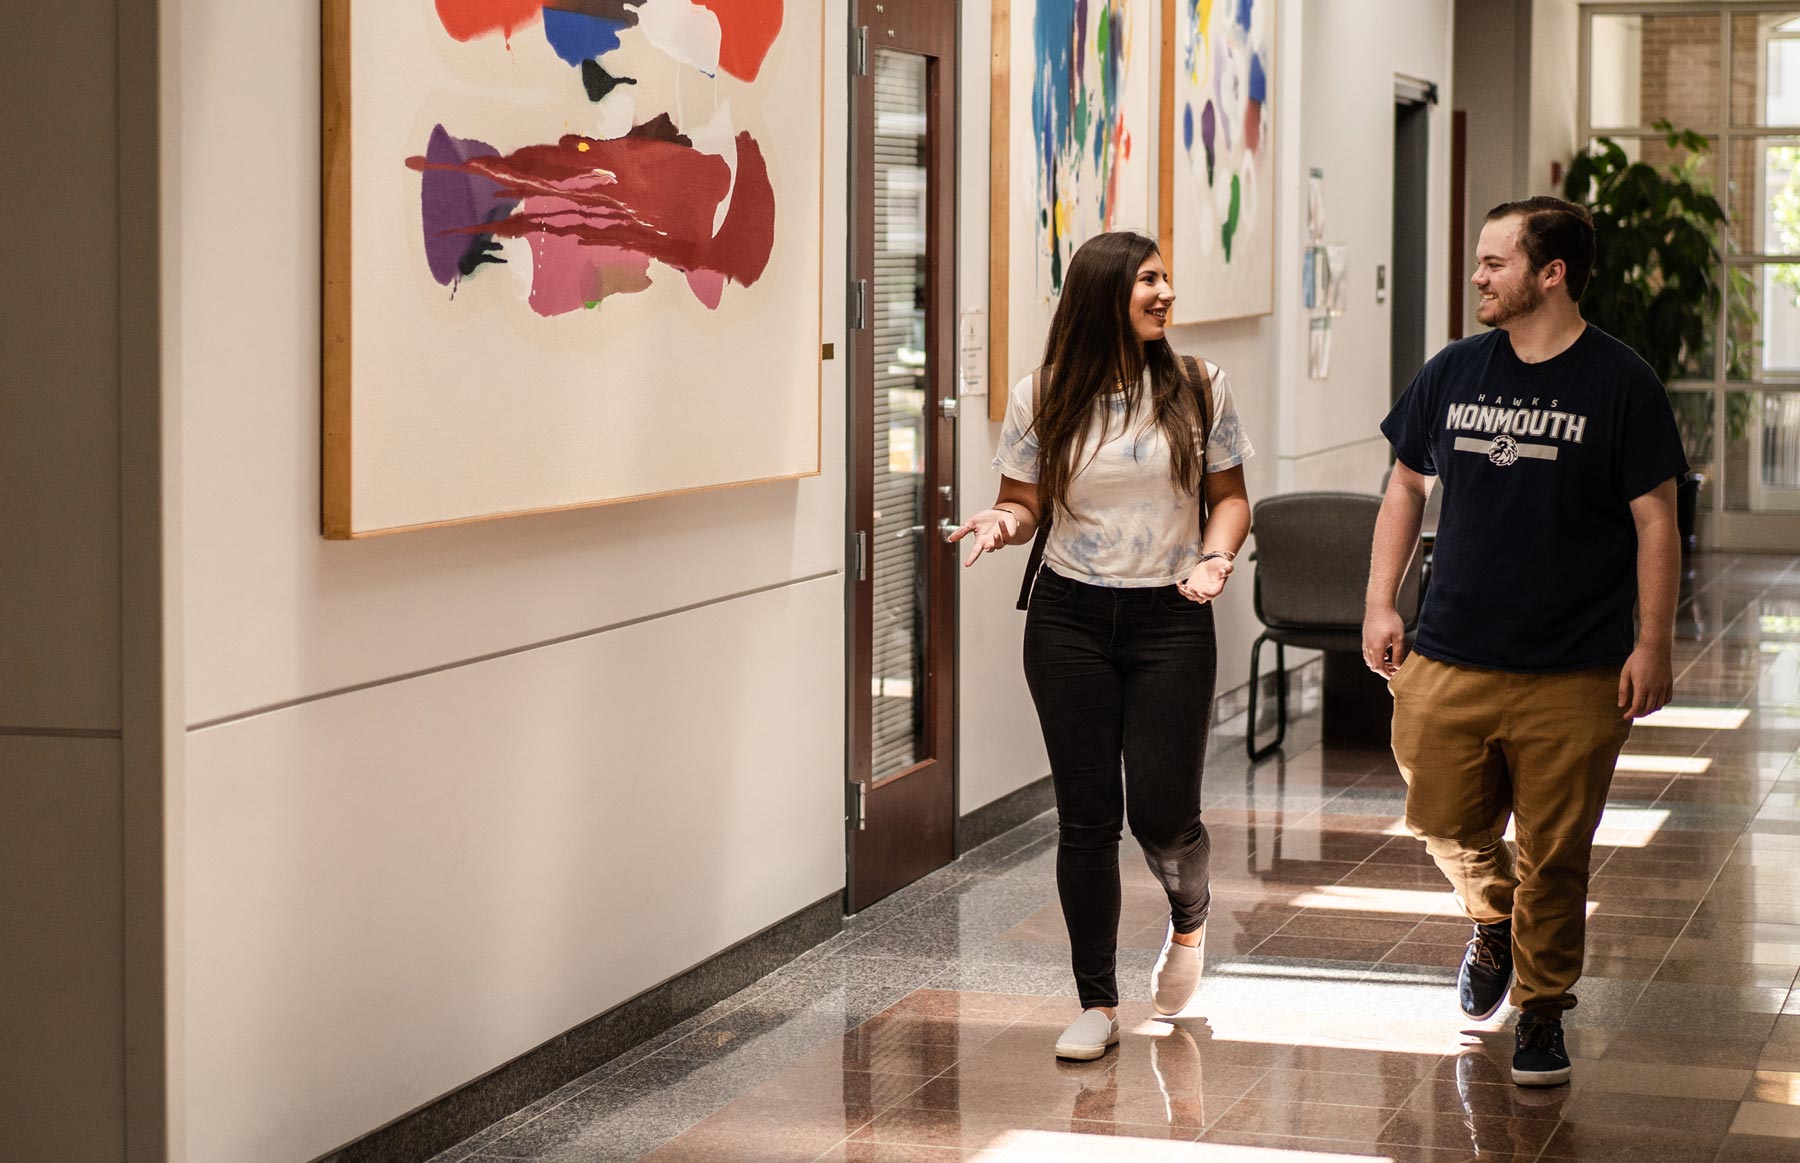 Students walking through plangere lobby